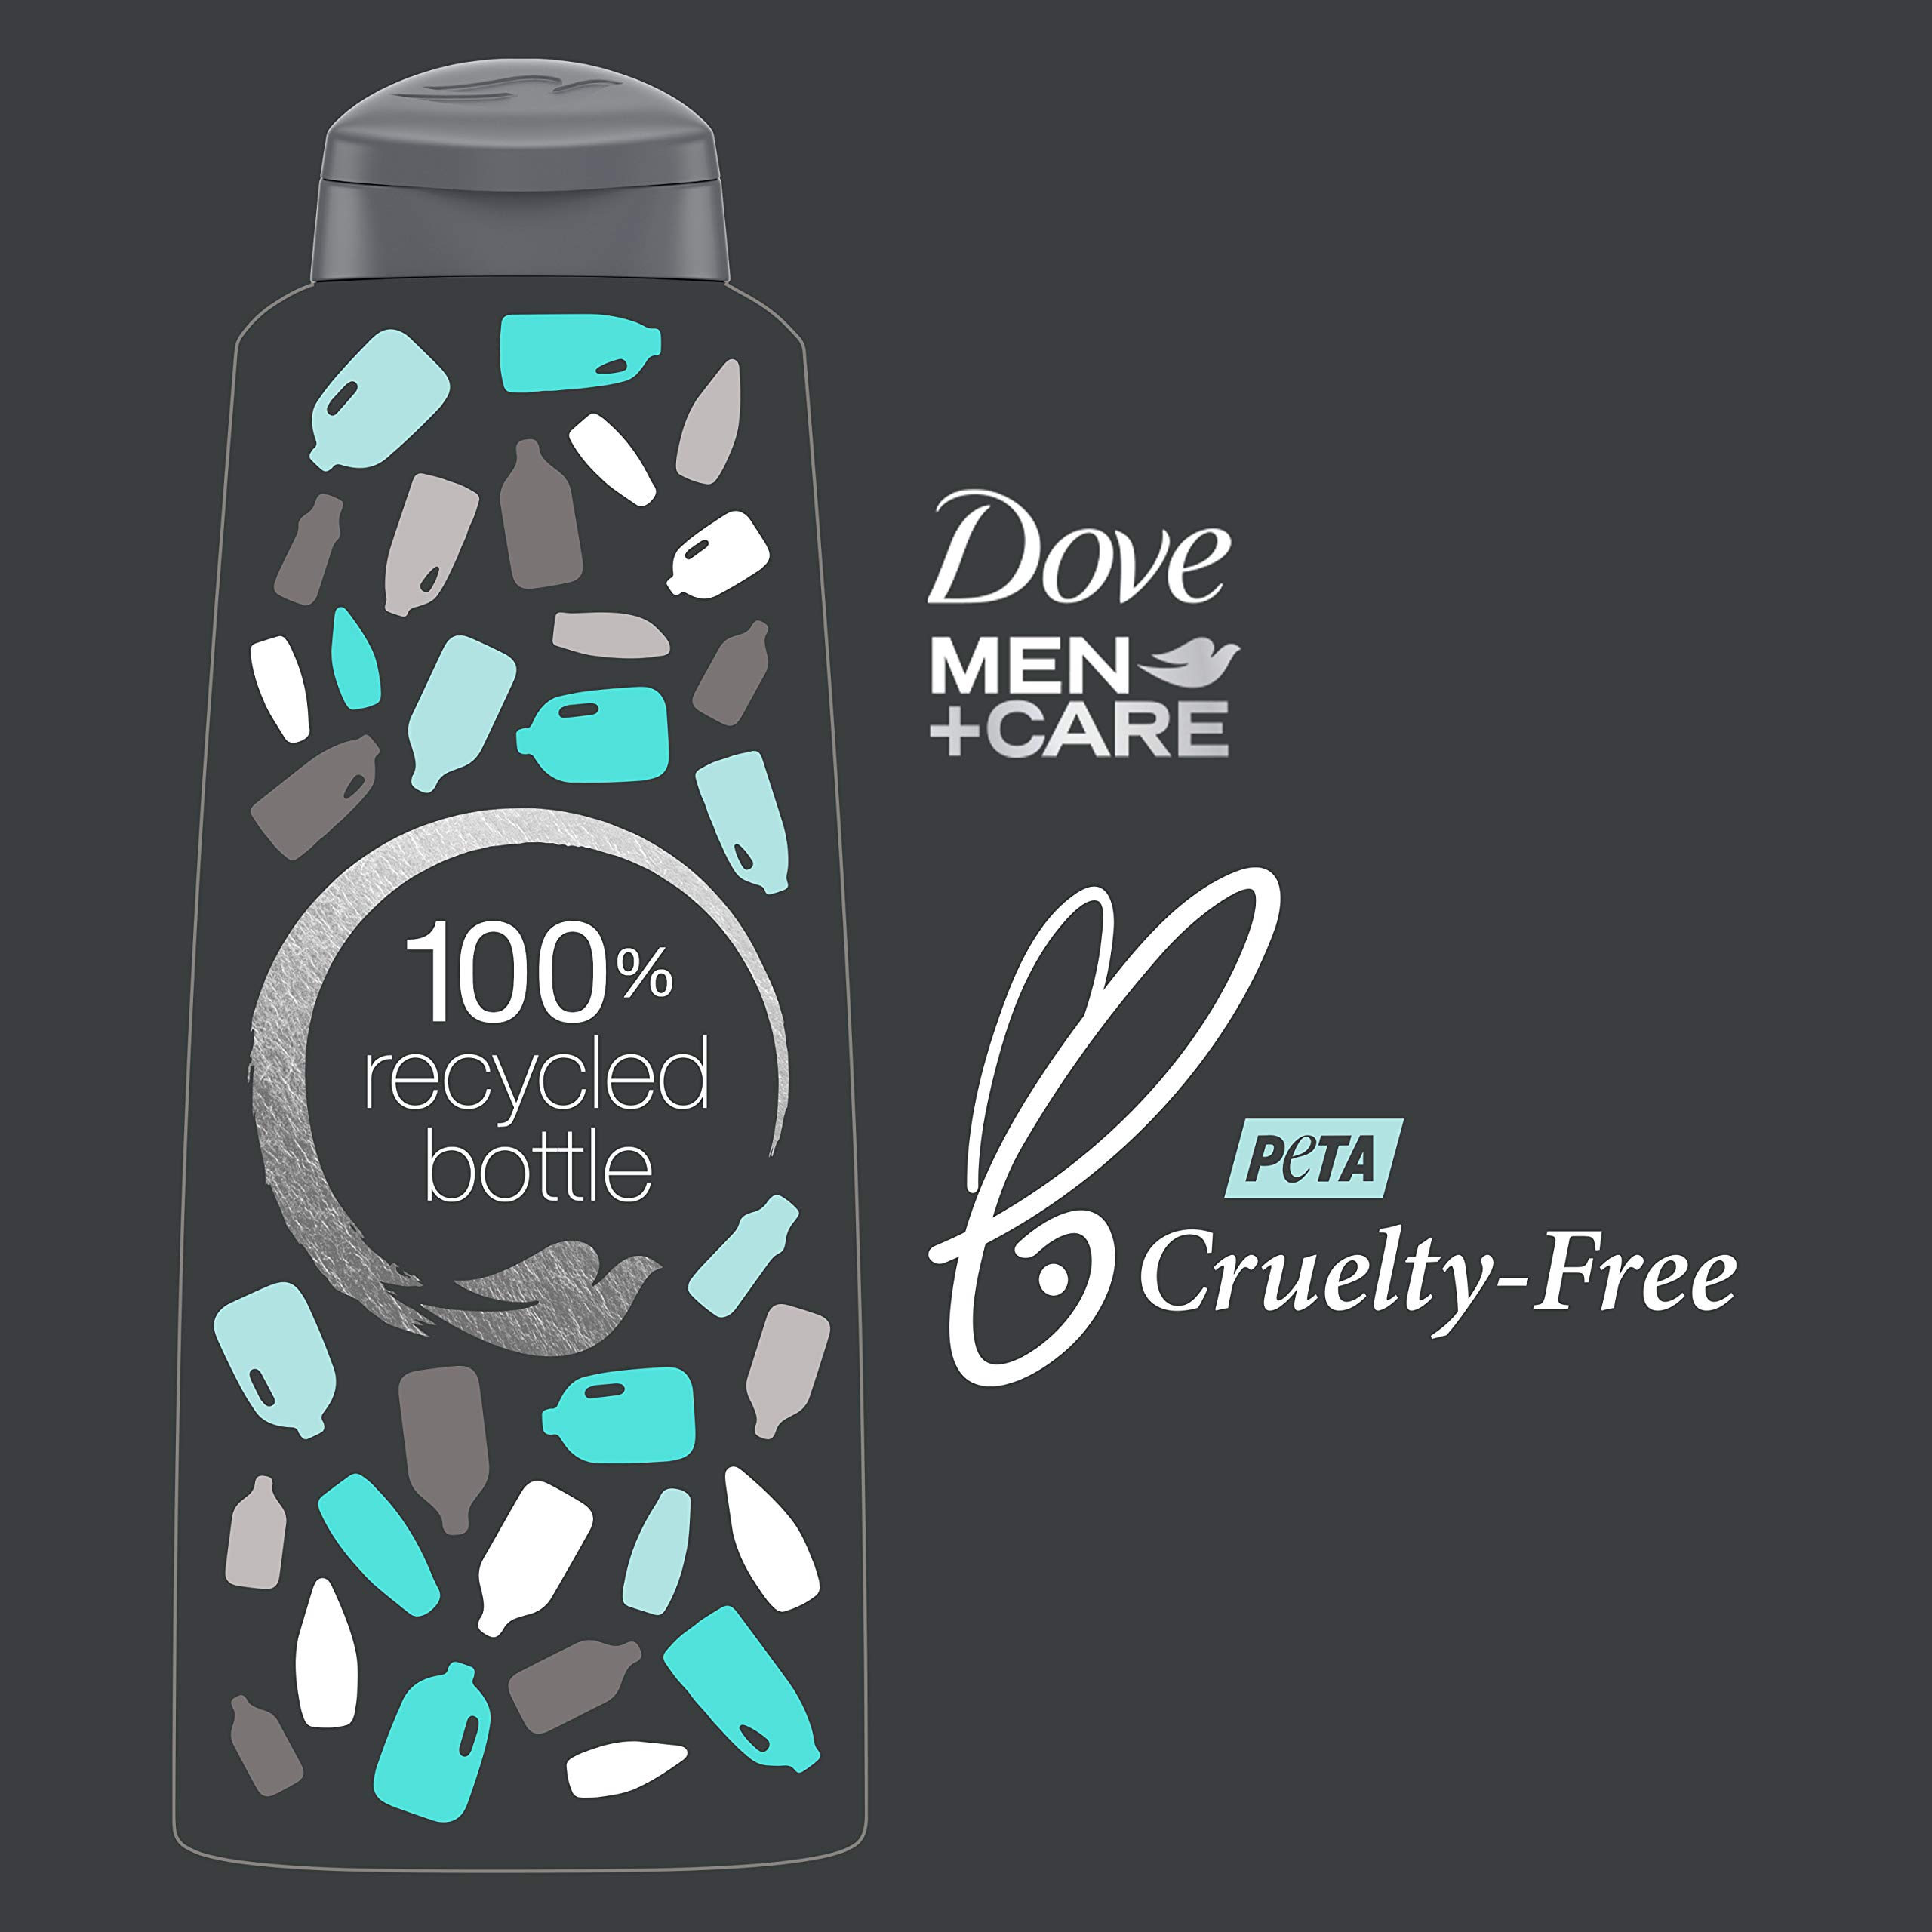 DOVE MEN + CARE 2 in 1 Shampoo Conditioner For Healthy-Looking Hair Eucalyptus + Birch Naturally Derived Plant Based Cleansers, 20.4 Fl Oz (Pack of 3)